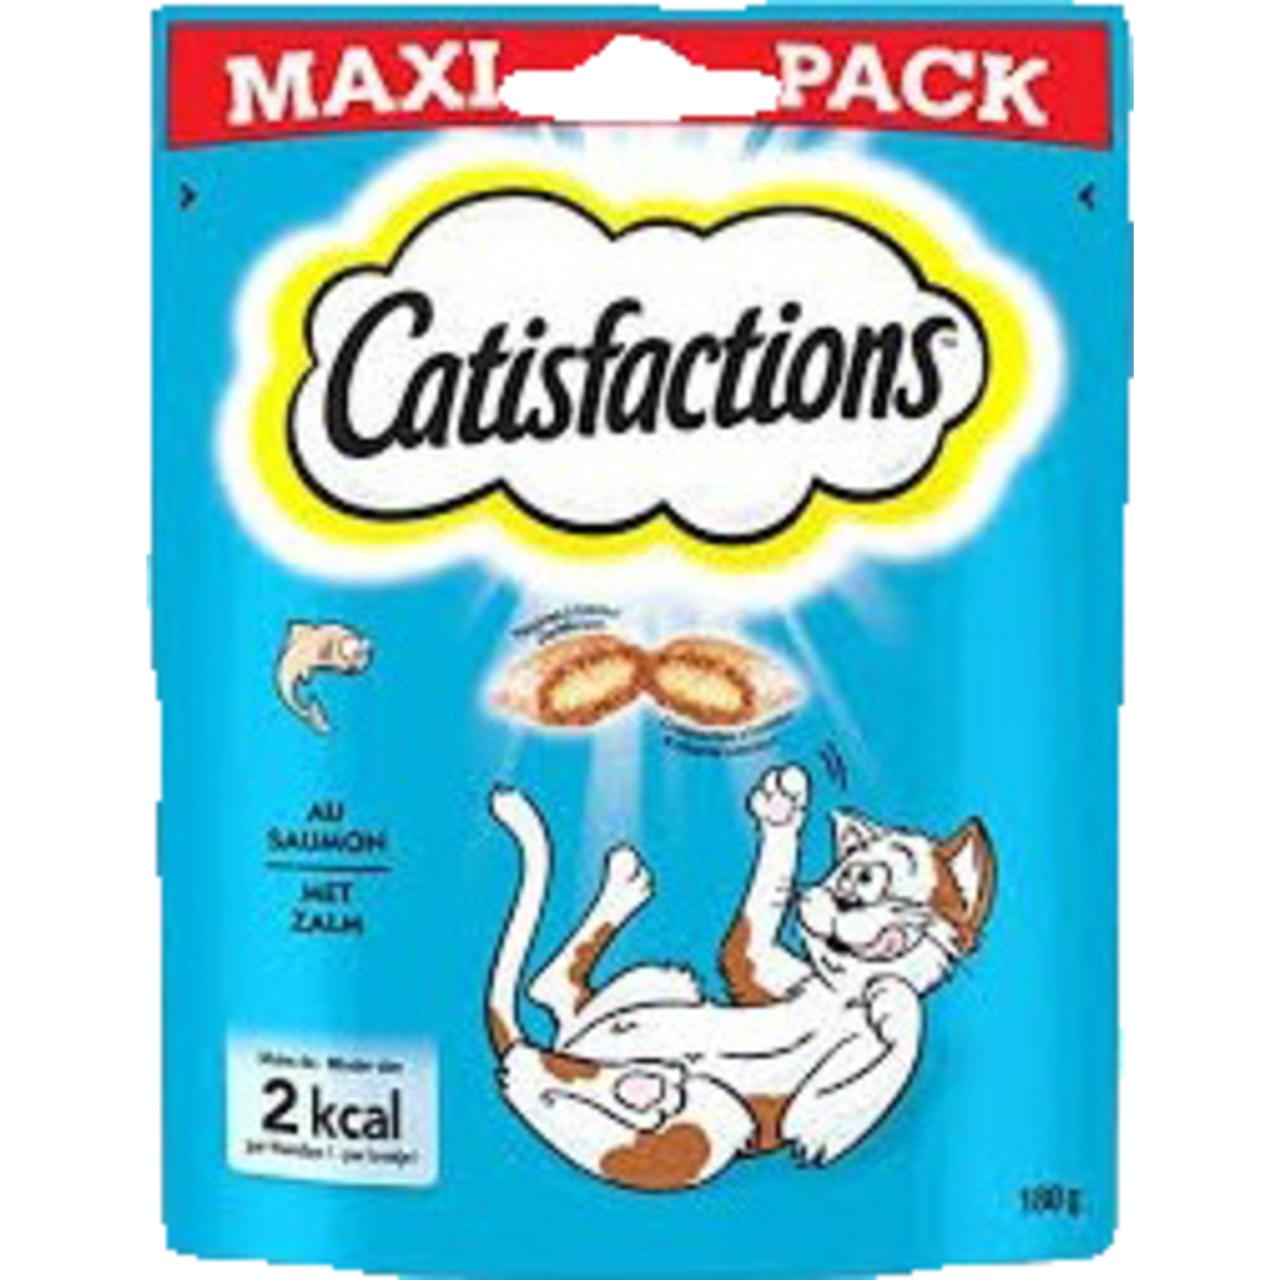 Catisfactions Laks/Lachs 180g